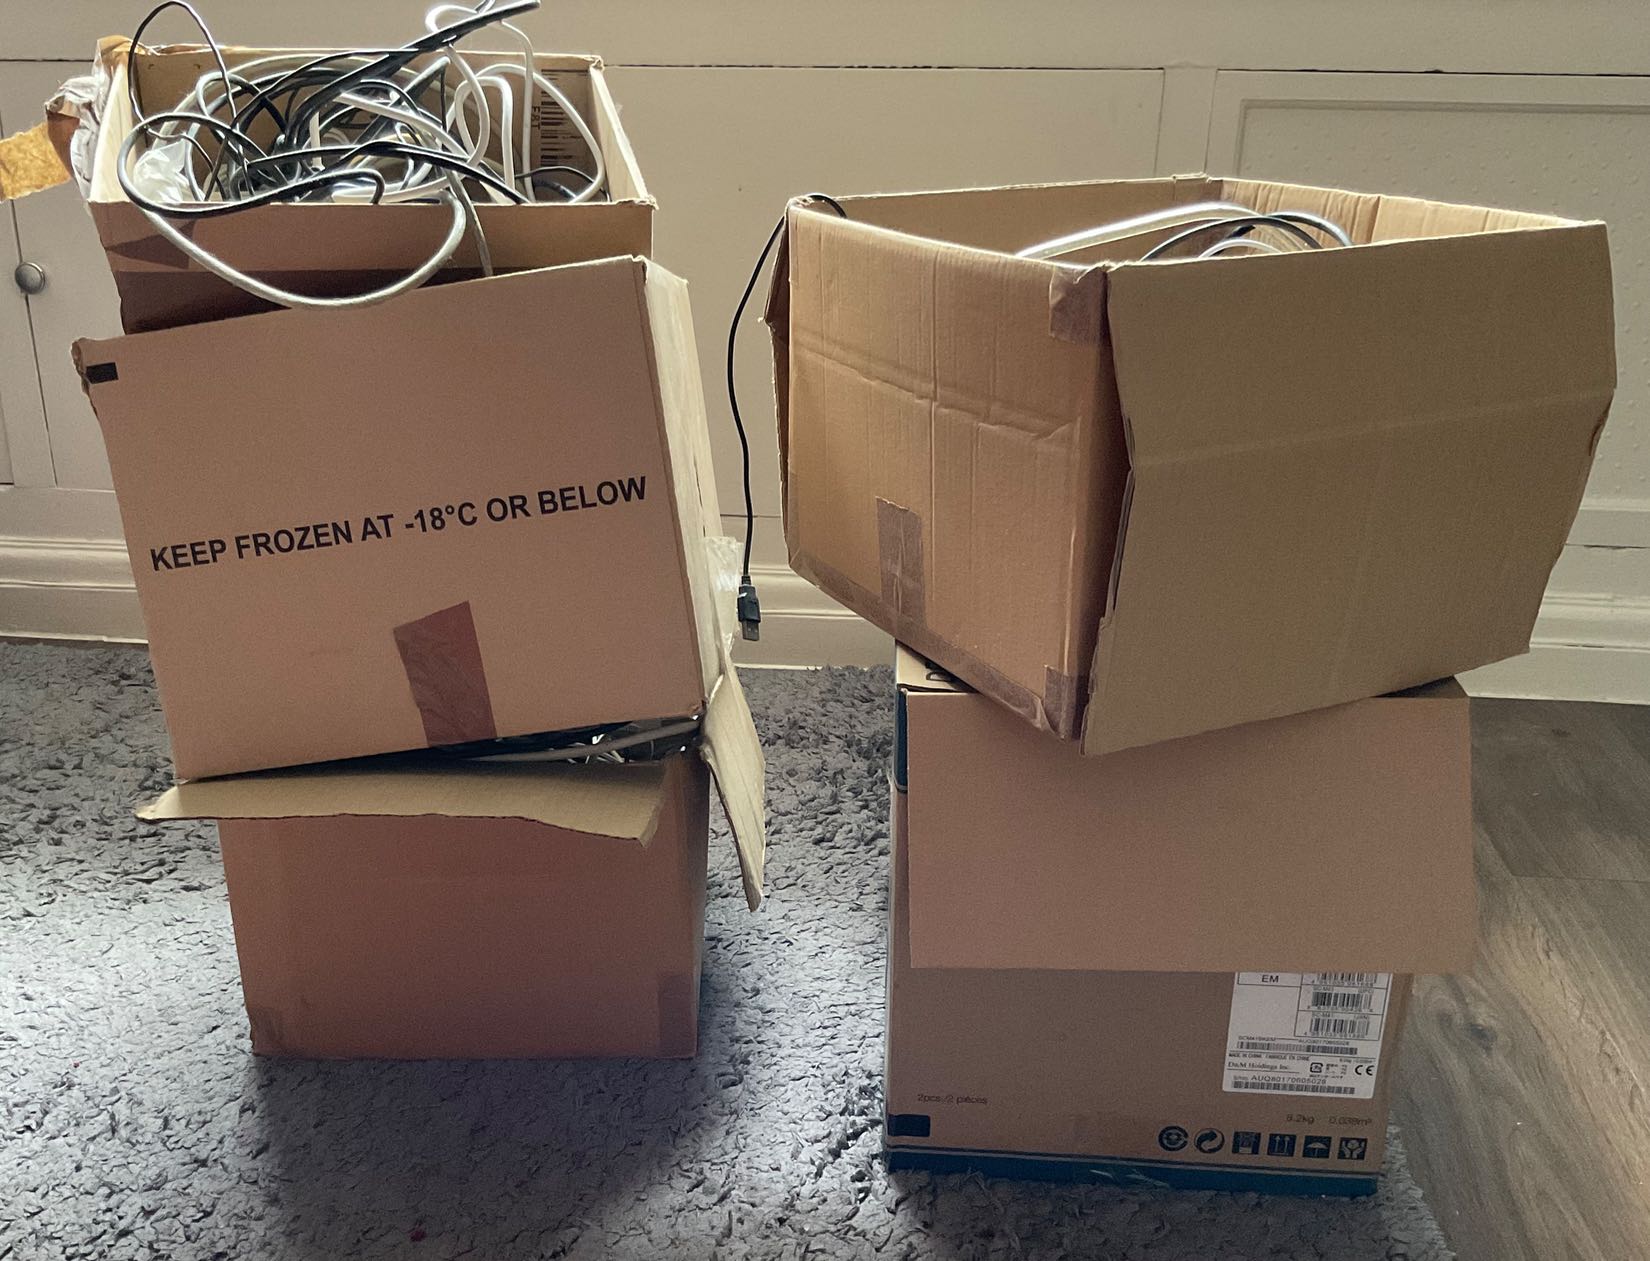 Boxes of wires